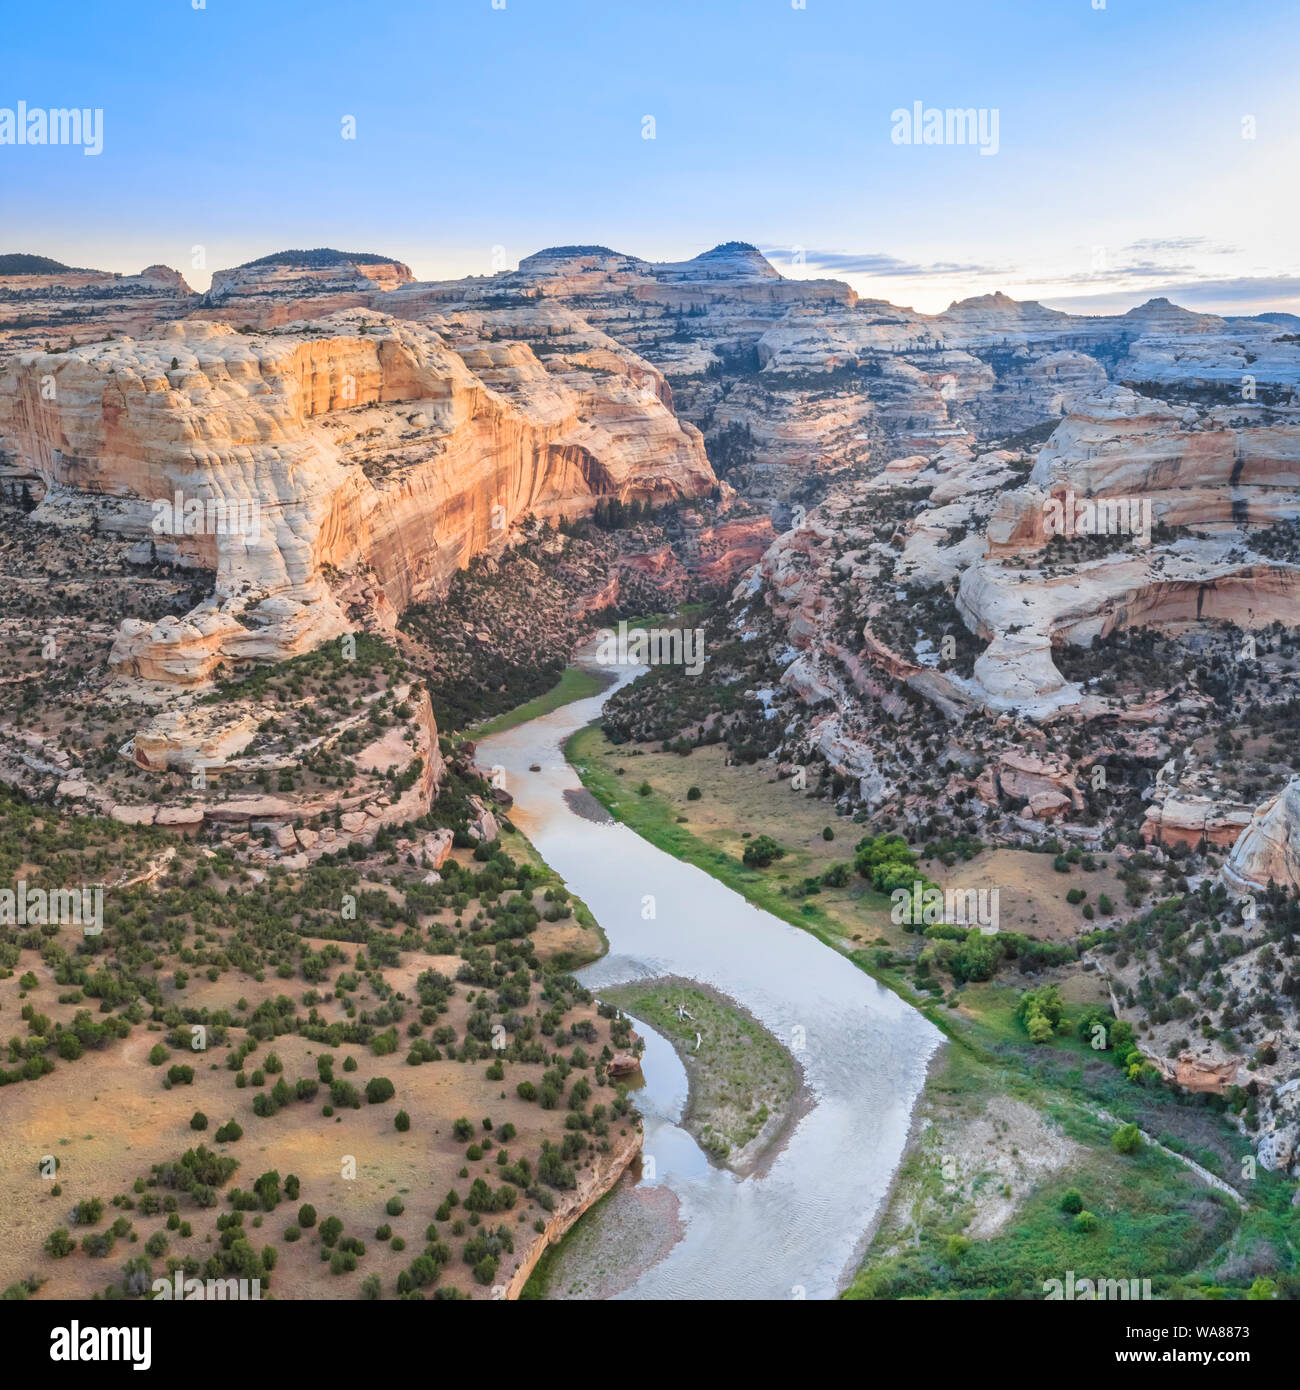 yampa river at wagon wheel point overlook in dinosaur national monument, colorado Stock Photo